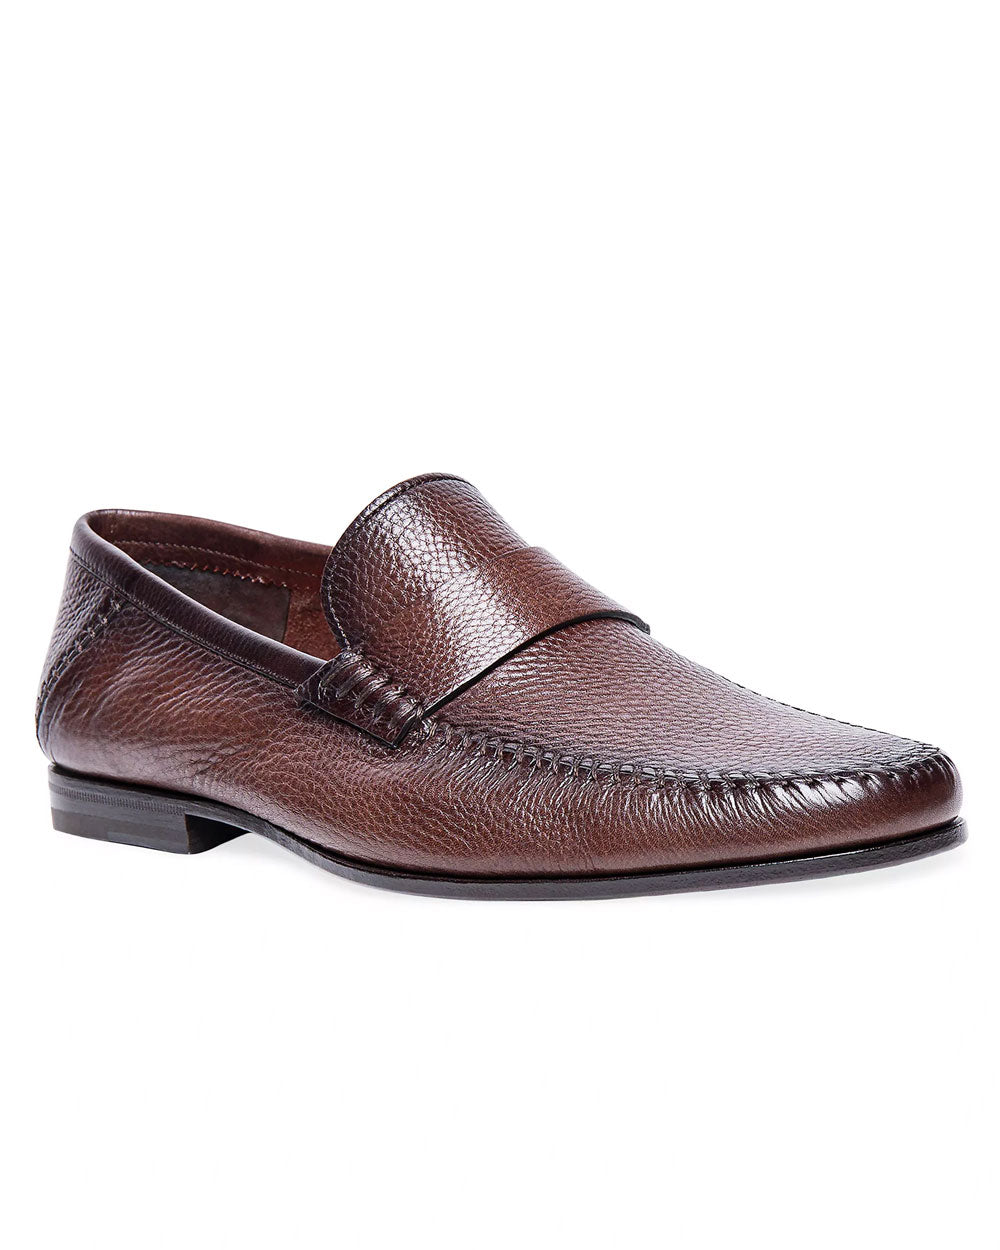 Paine Tumbled Leather Loafer in Dark Brown